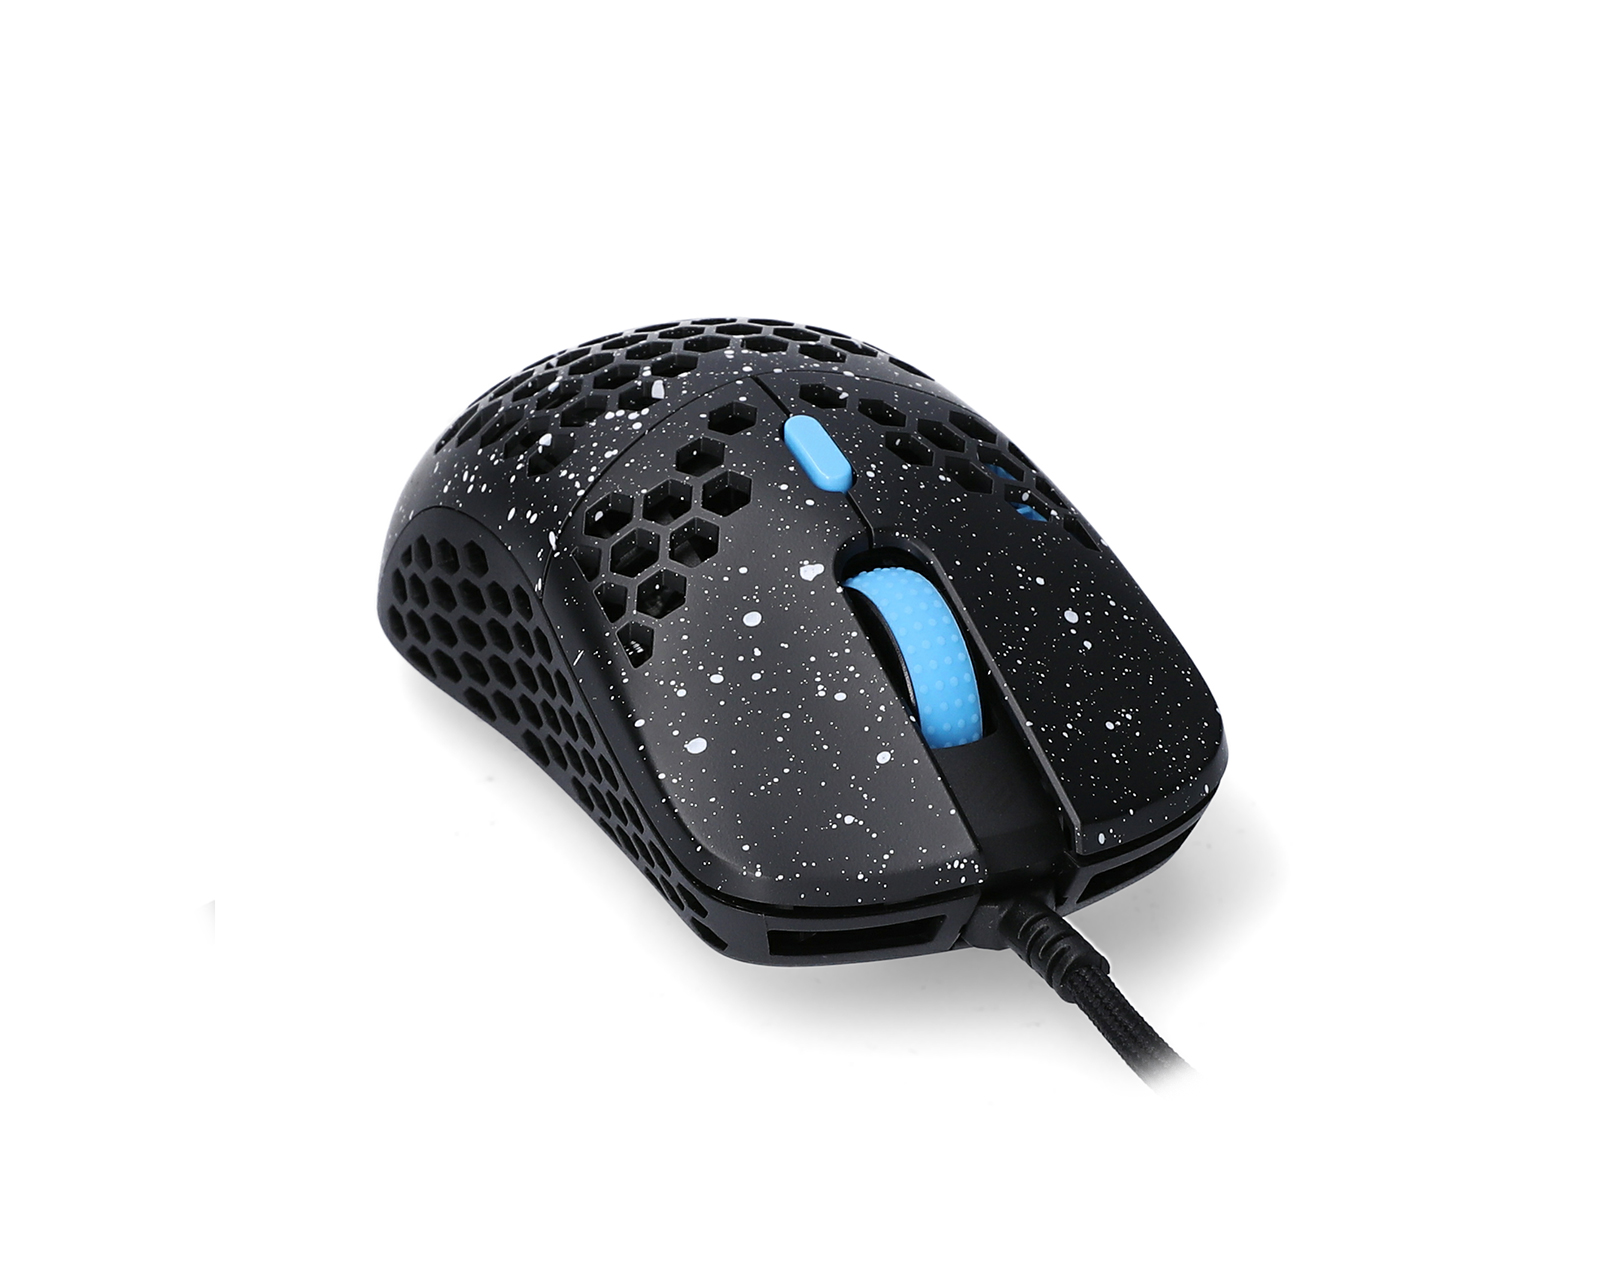 G-Wolves Hati S Stardust Gaming Mouse - us.MaxGaming.com